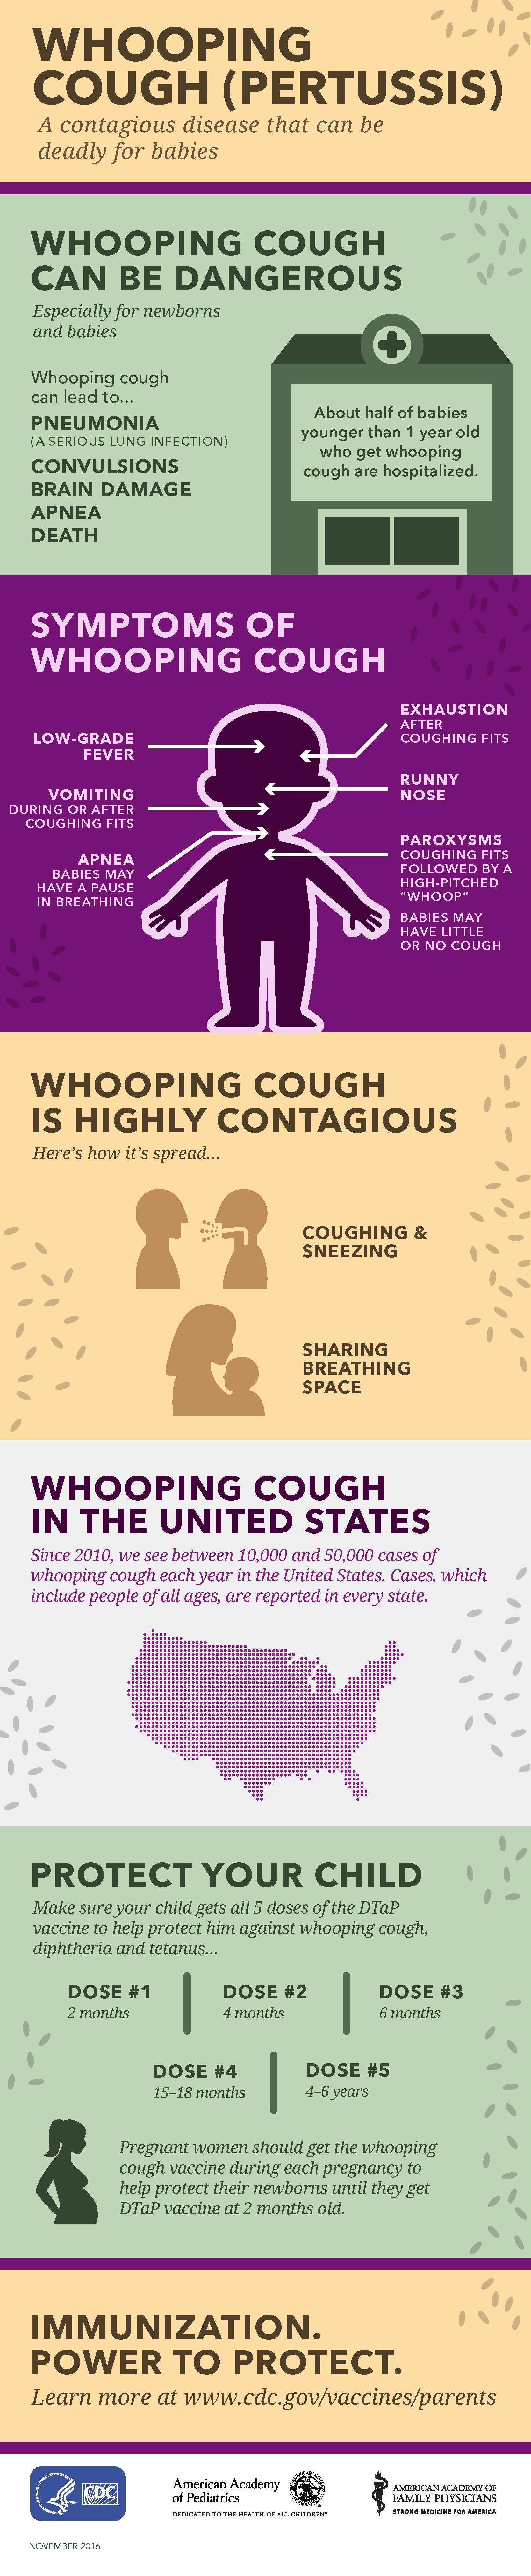 whooping-cough-infographic